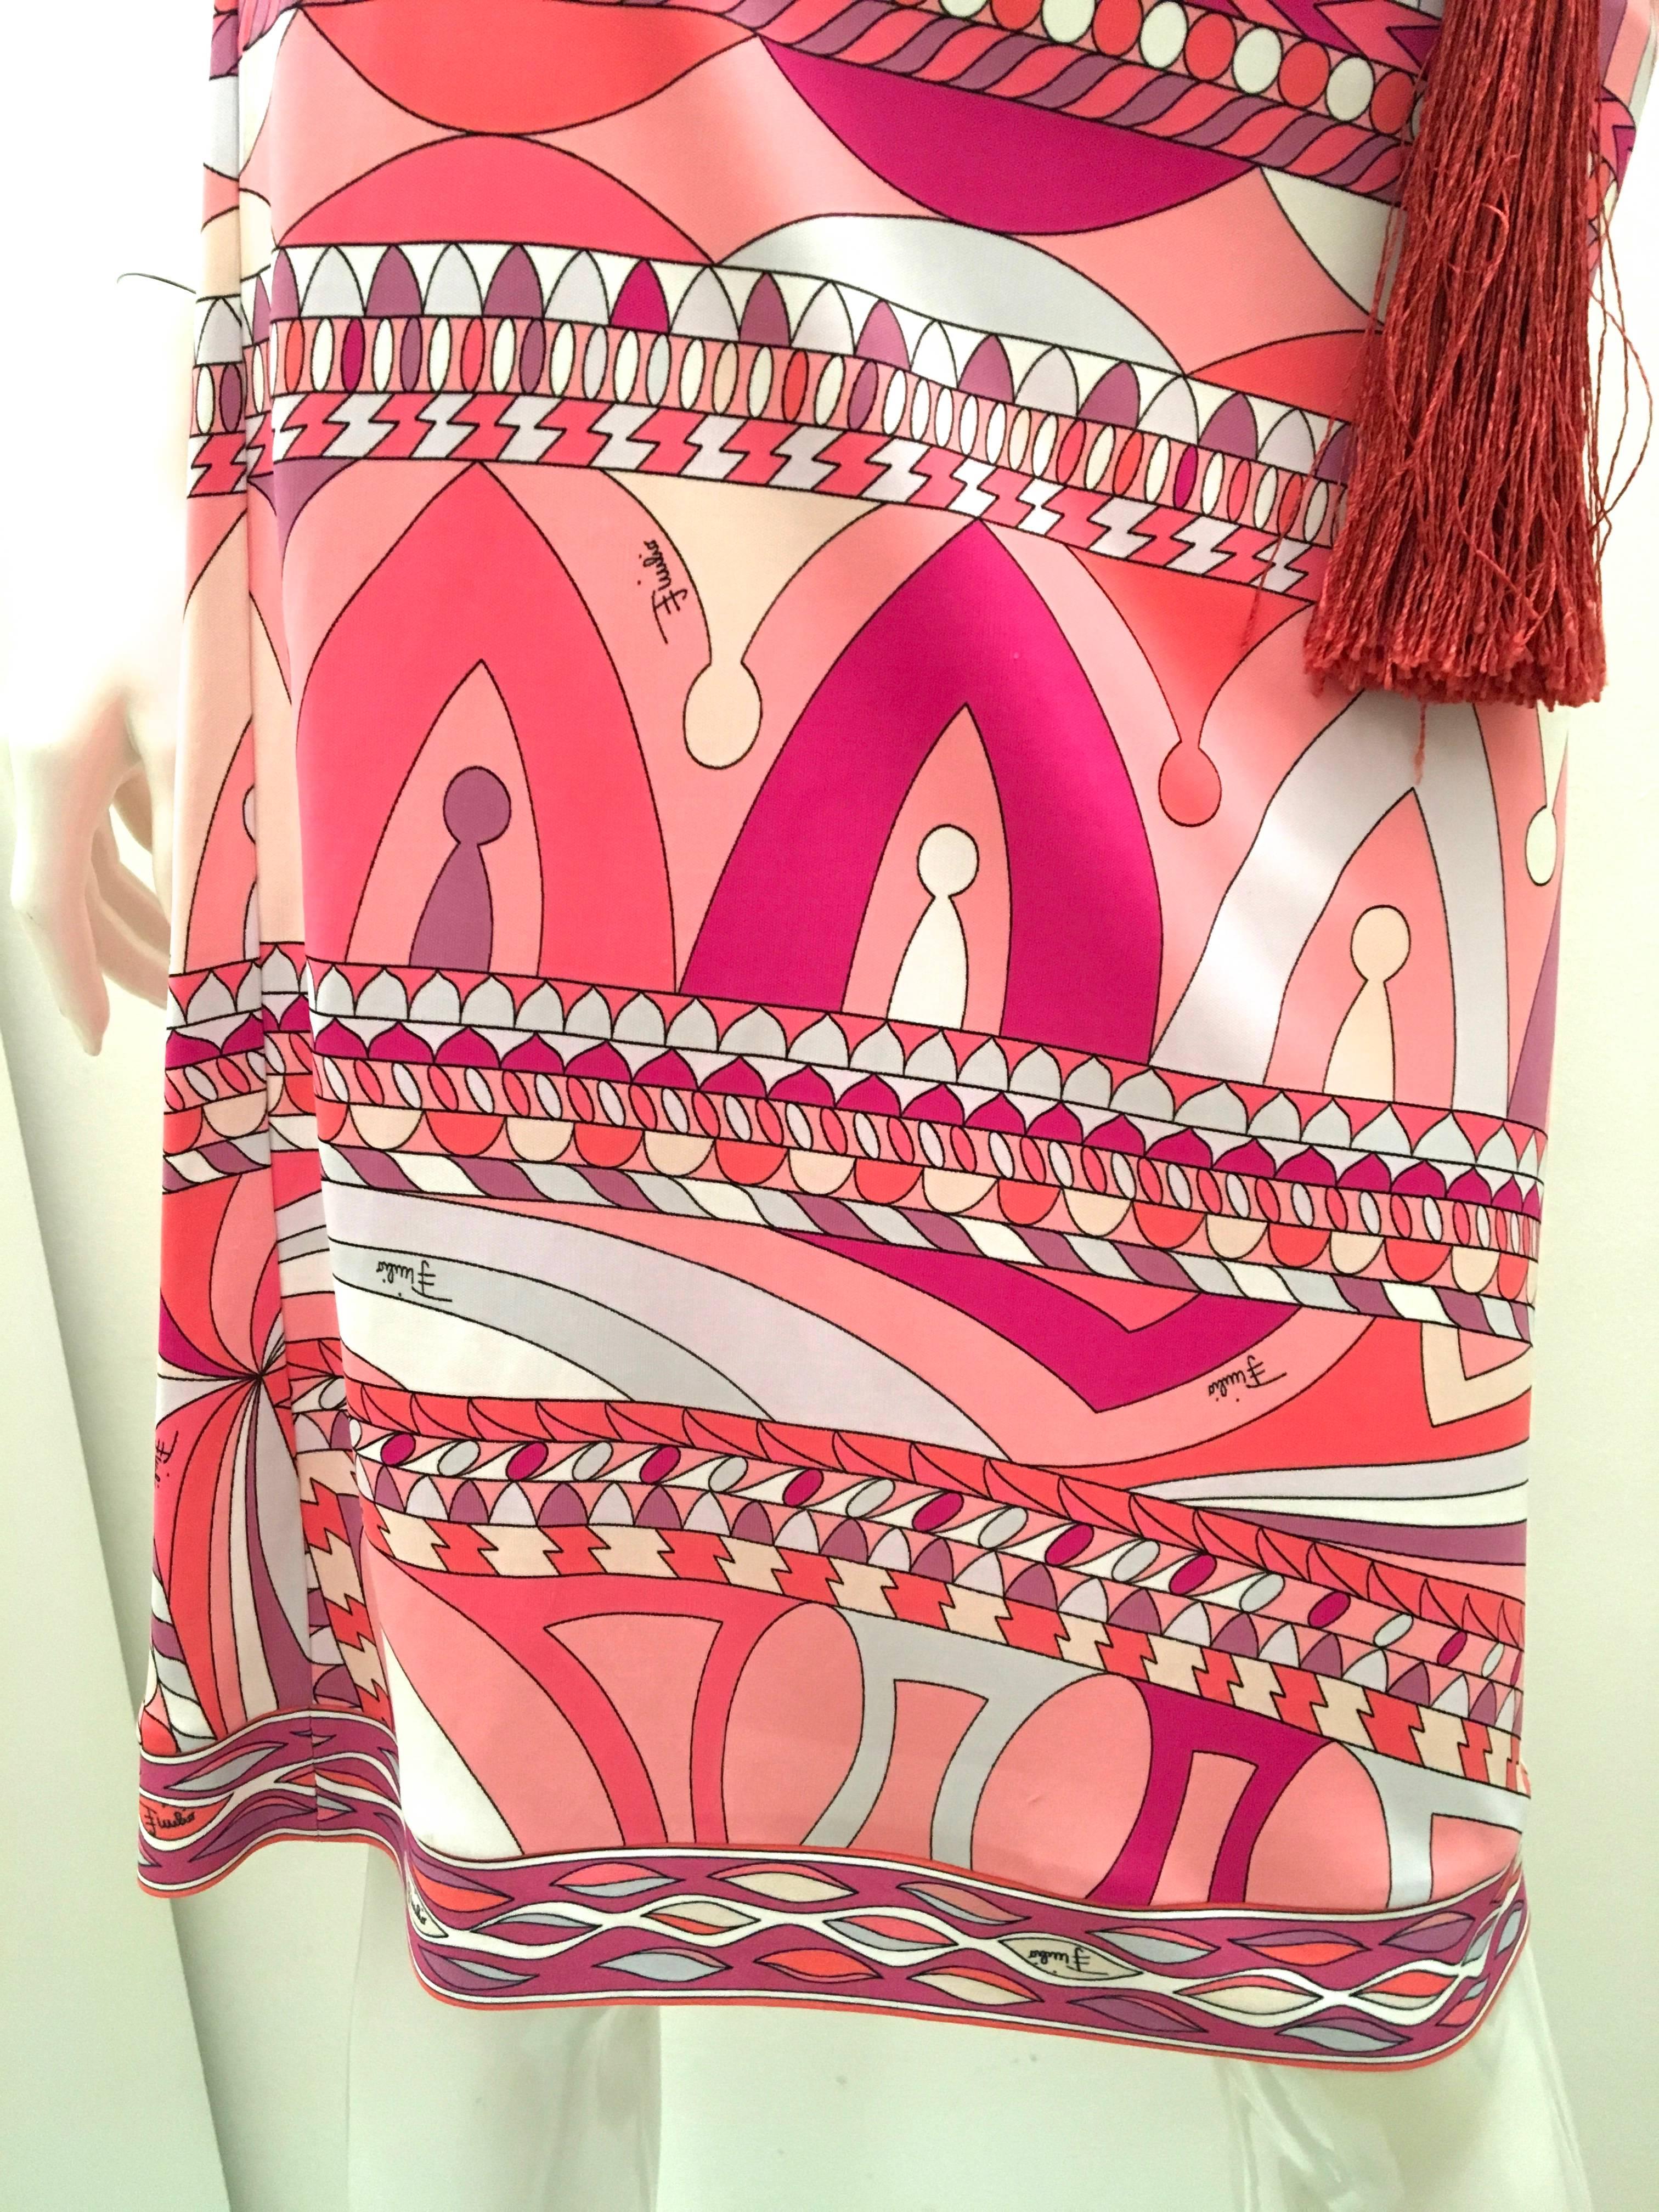 New Emilio Pucci Skirt w/ Tags 4